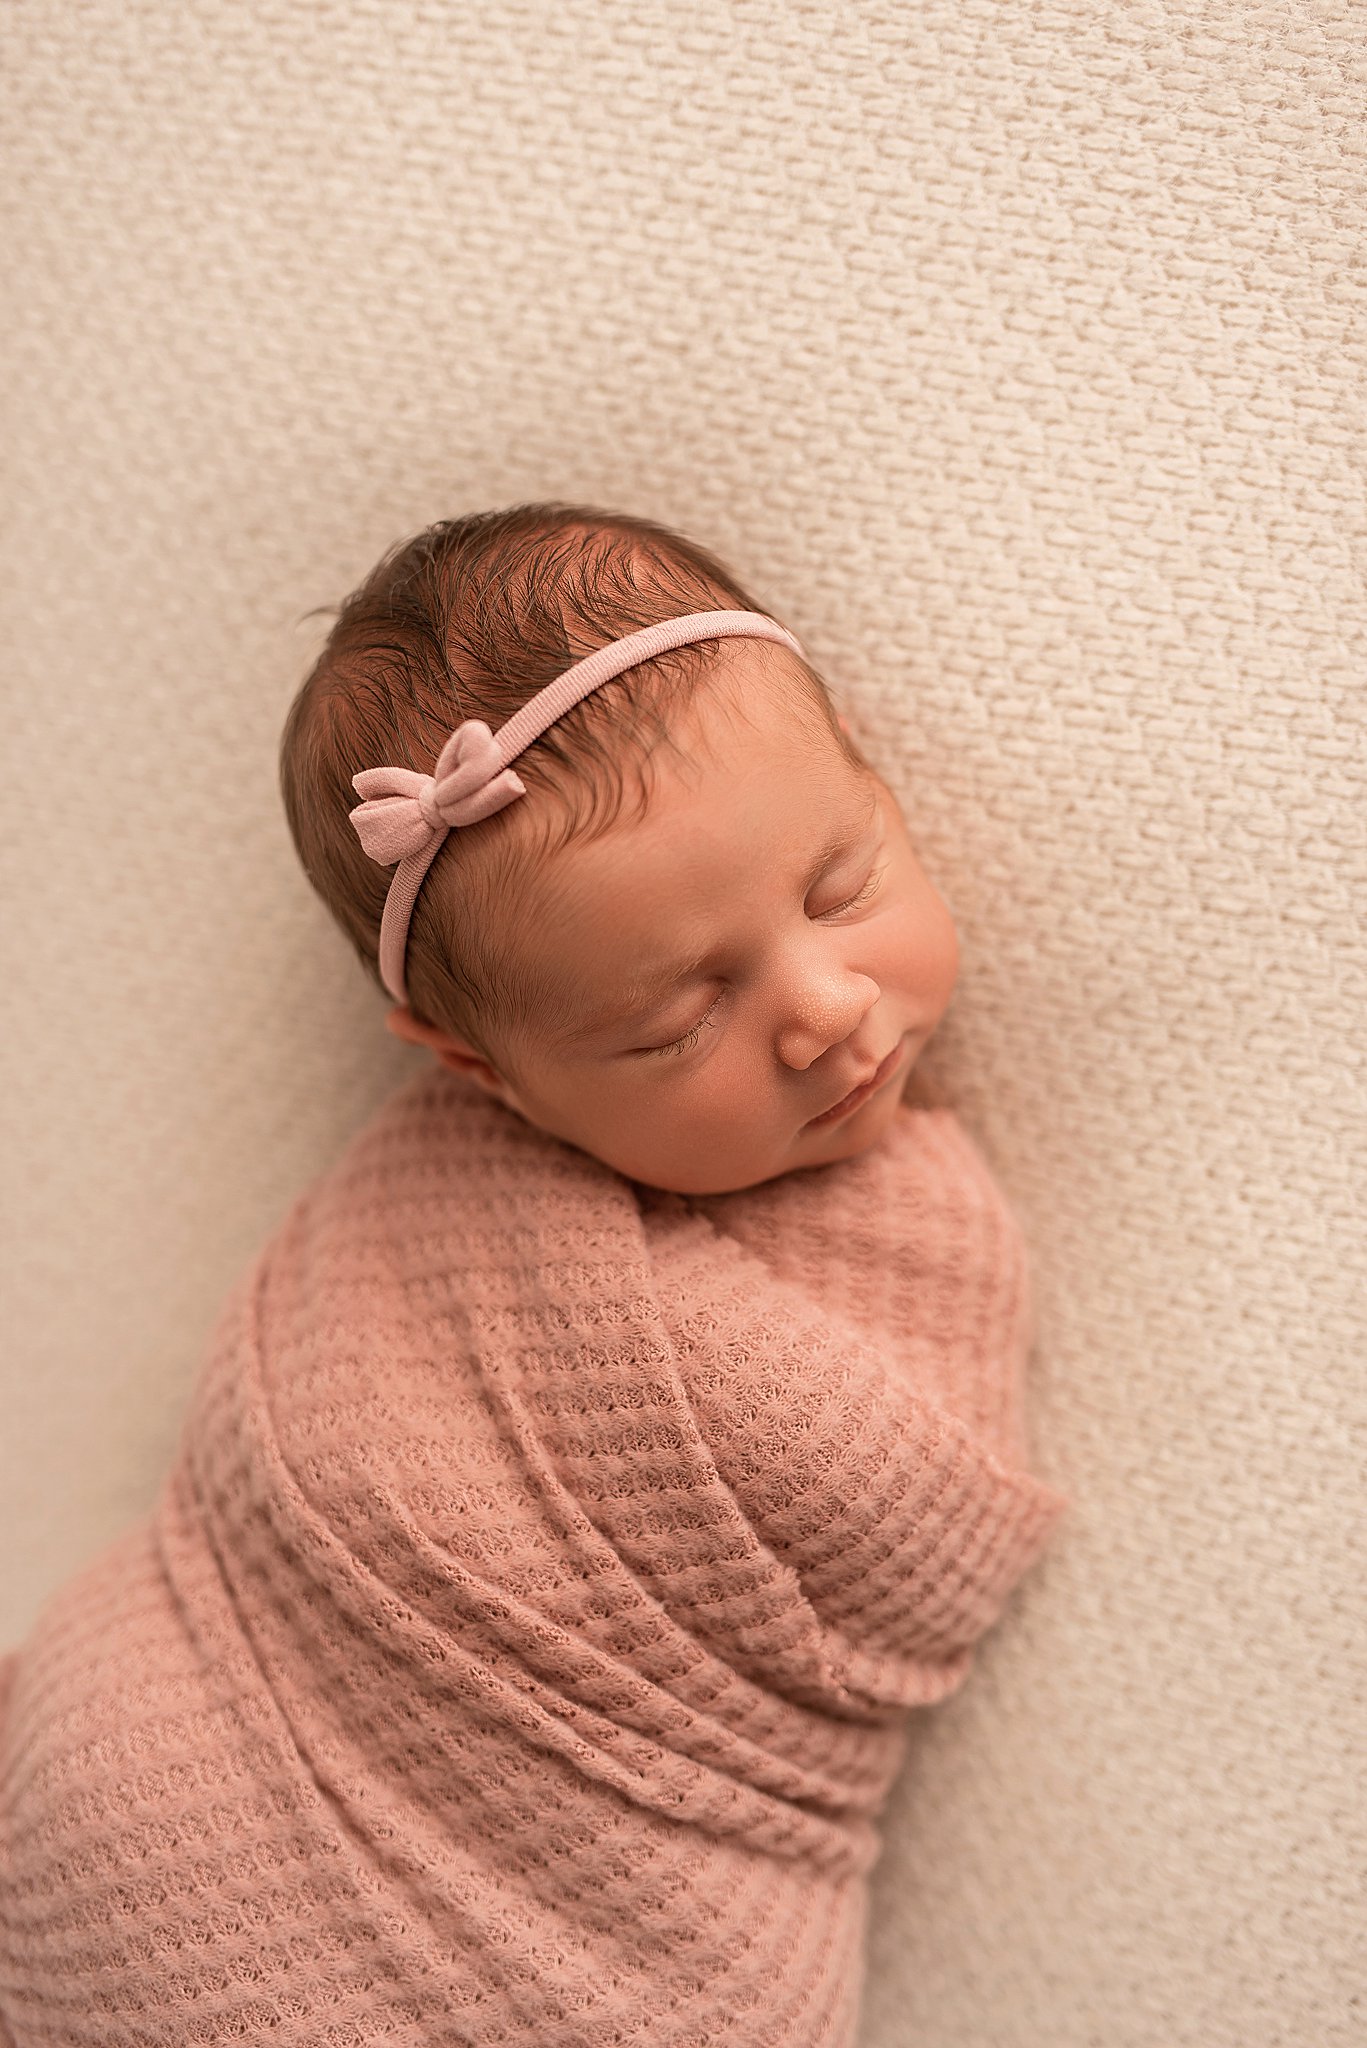 A newborn baby sleeps while swaddled in a pink blanket and pink headband with a bow The nanny connection